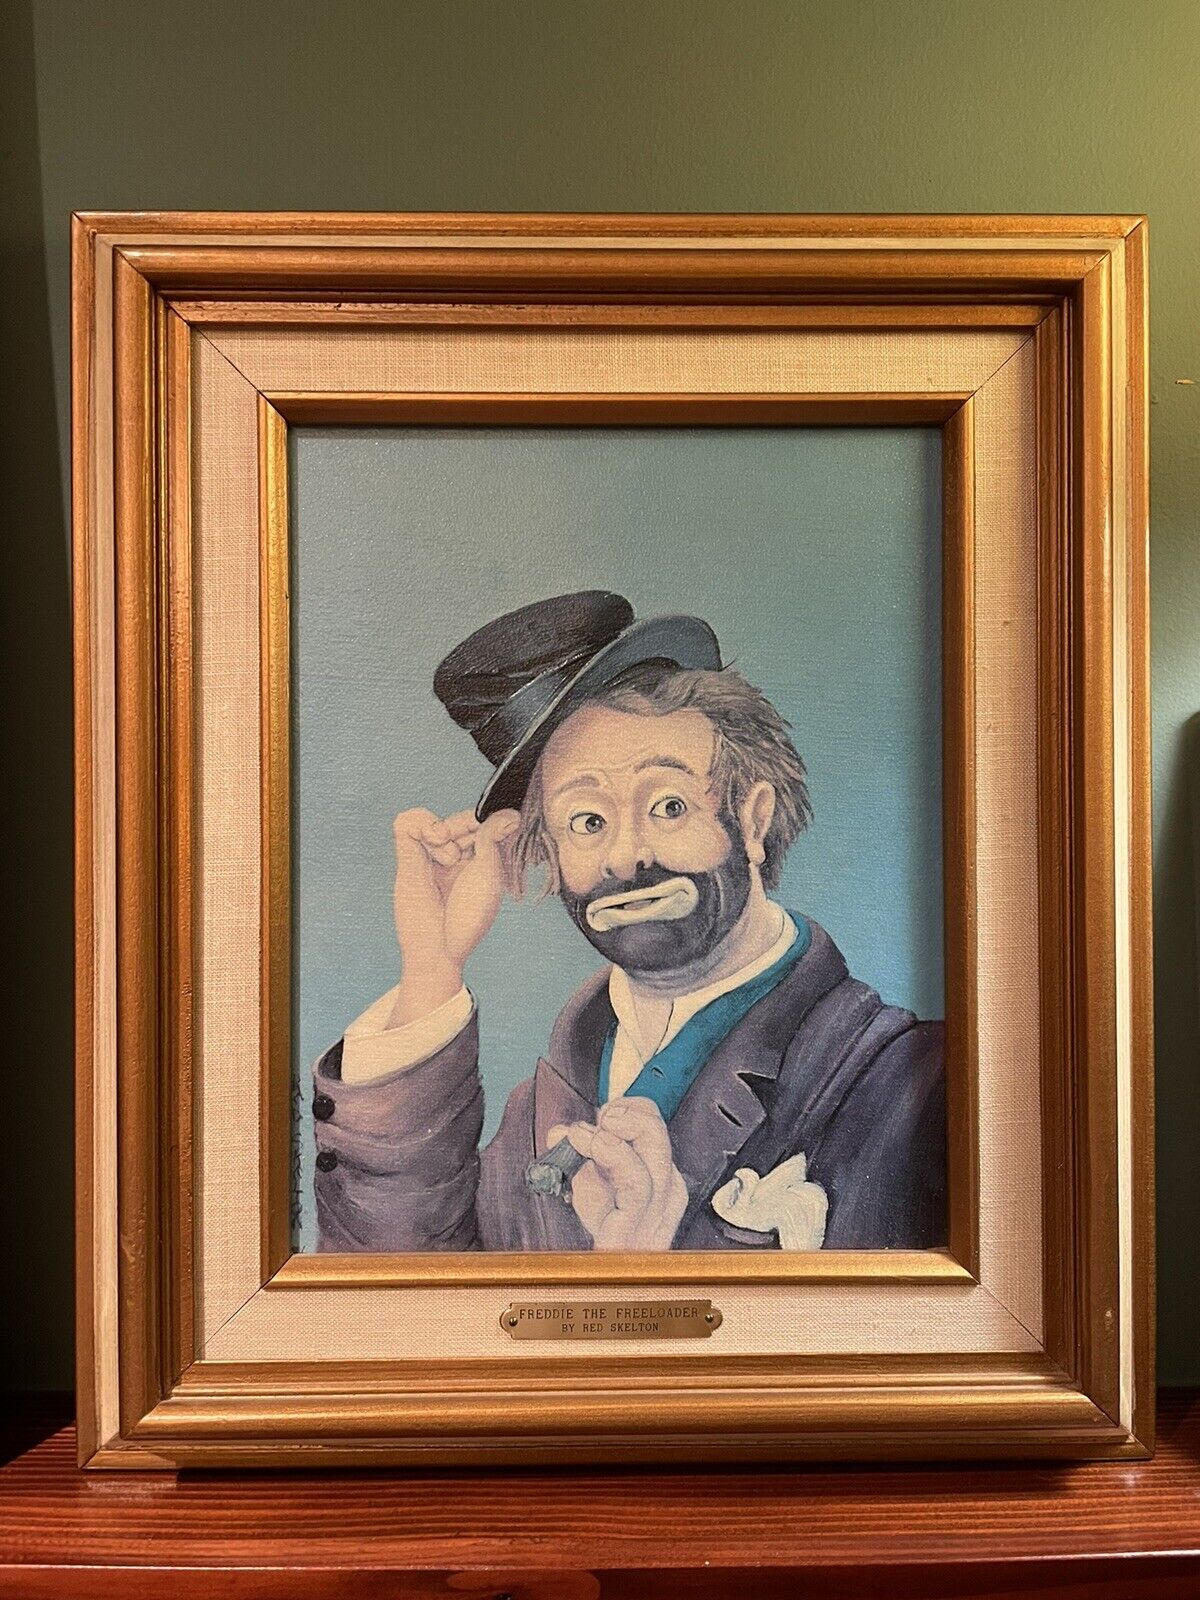 RED SKELTON SIGNED/NUMBERED FREDDIE THE FREELOADER PAINTING WITH COA: EXCELLENT